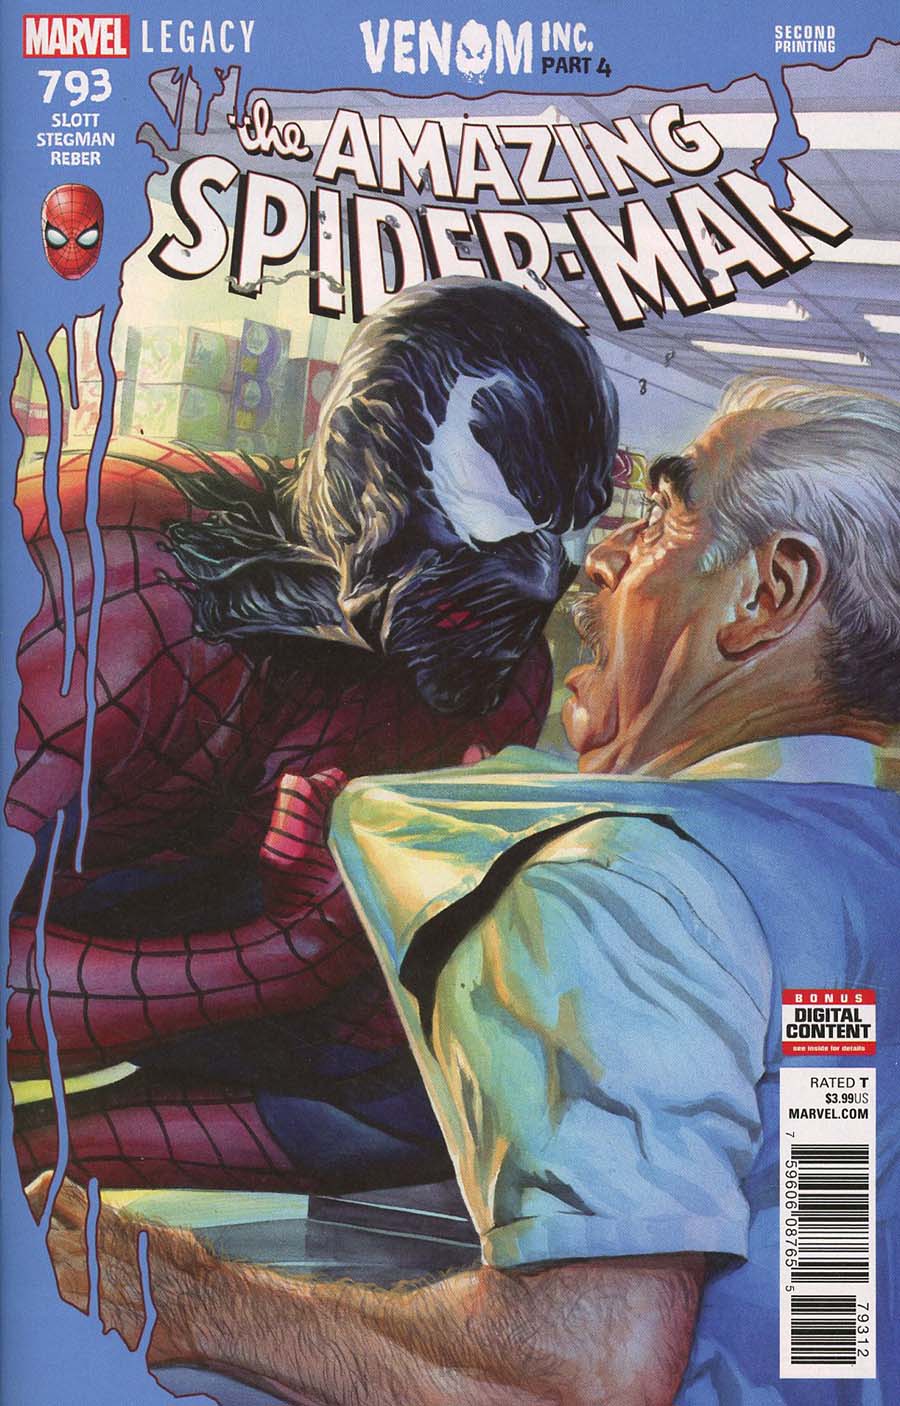 Amazing Spider-Man Vol 4 #793 Cover C 2nd Ptg Variant Alex Ross Cover (Venom Inc Part 4)(Marvel Legacy Tie-In)